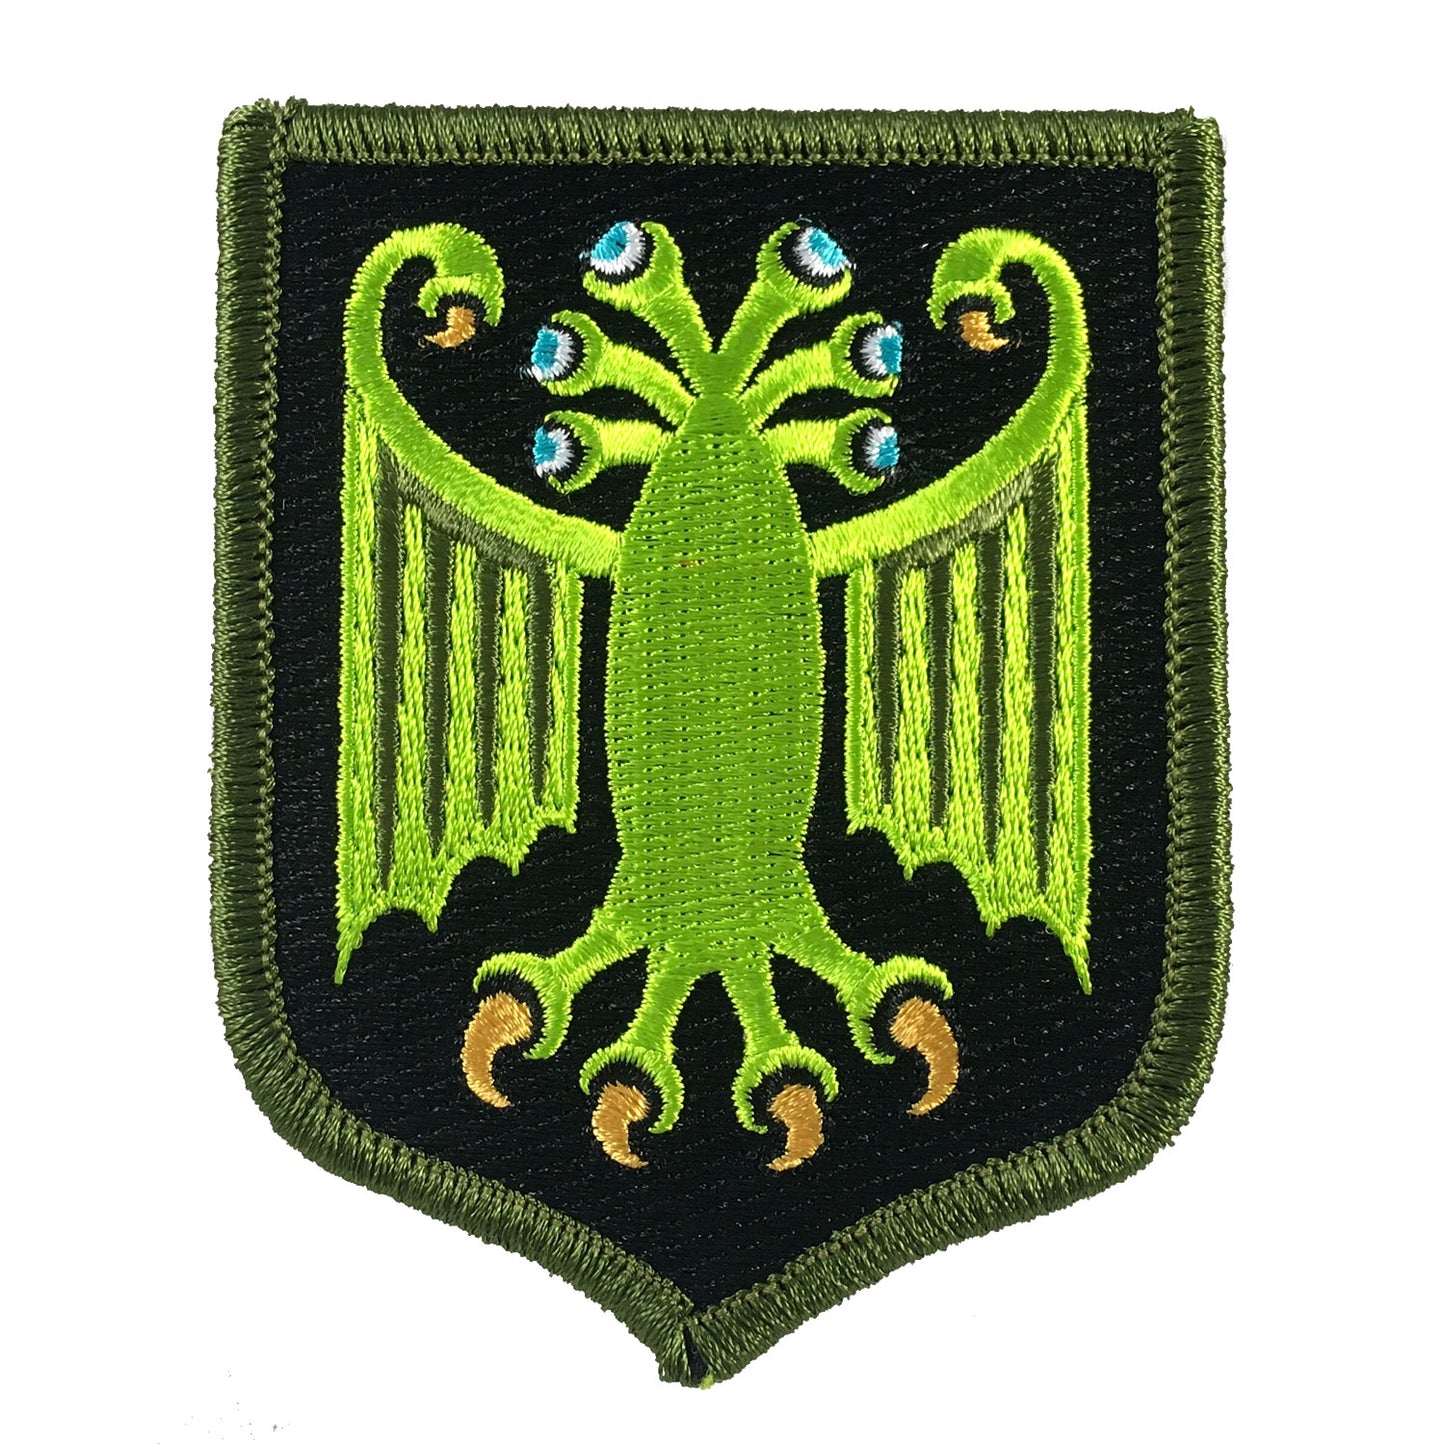 Elder Thing heraldic shield embroidered patch by Monsterologist